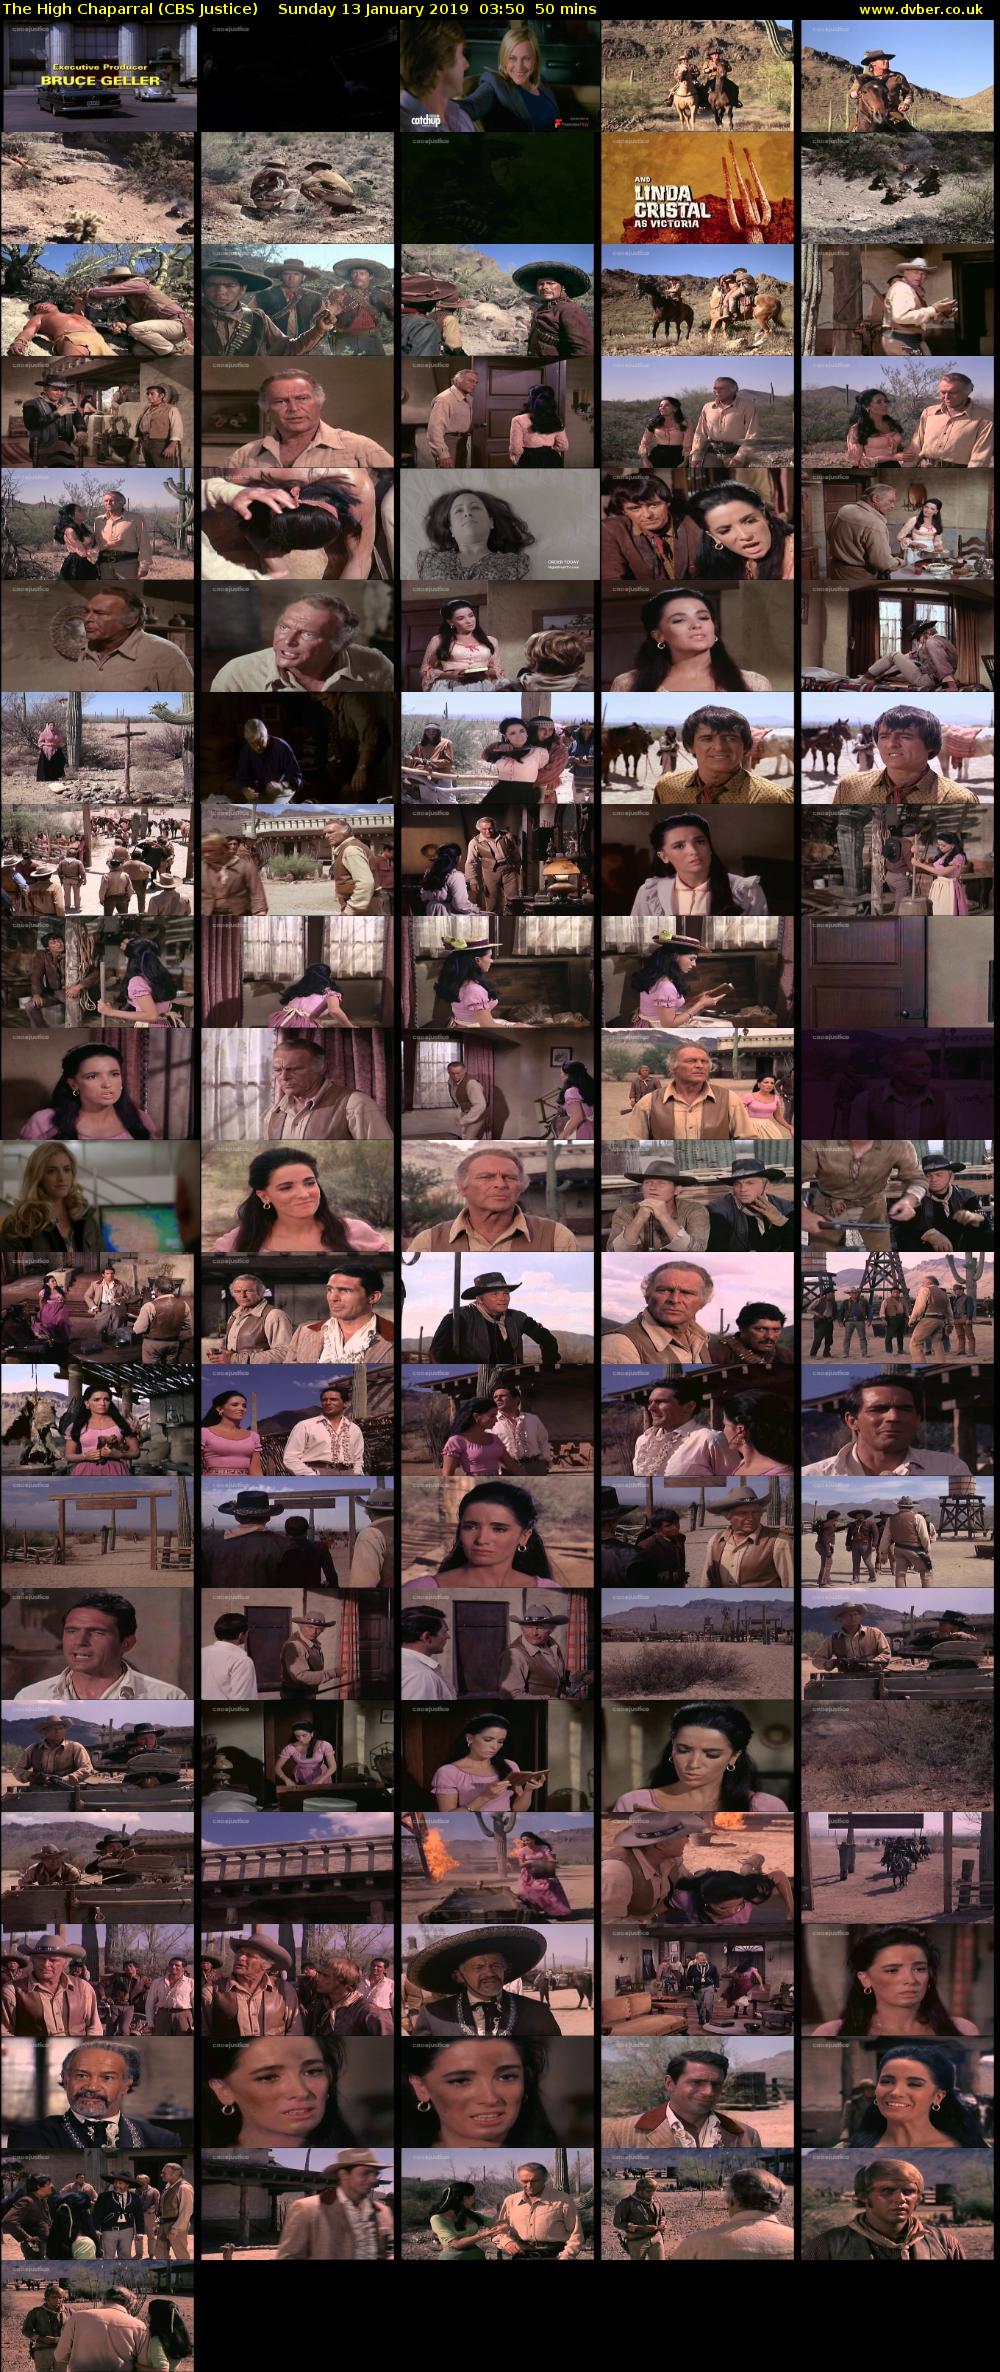 The High Chaparral (CBS Justice) Sunday 13 January 2019 03:50 - 04:40